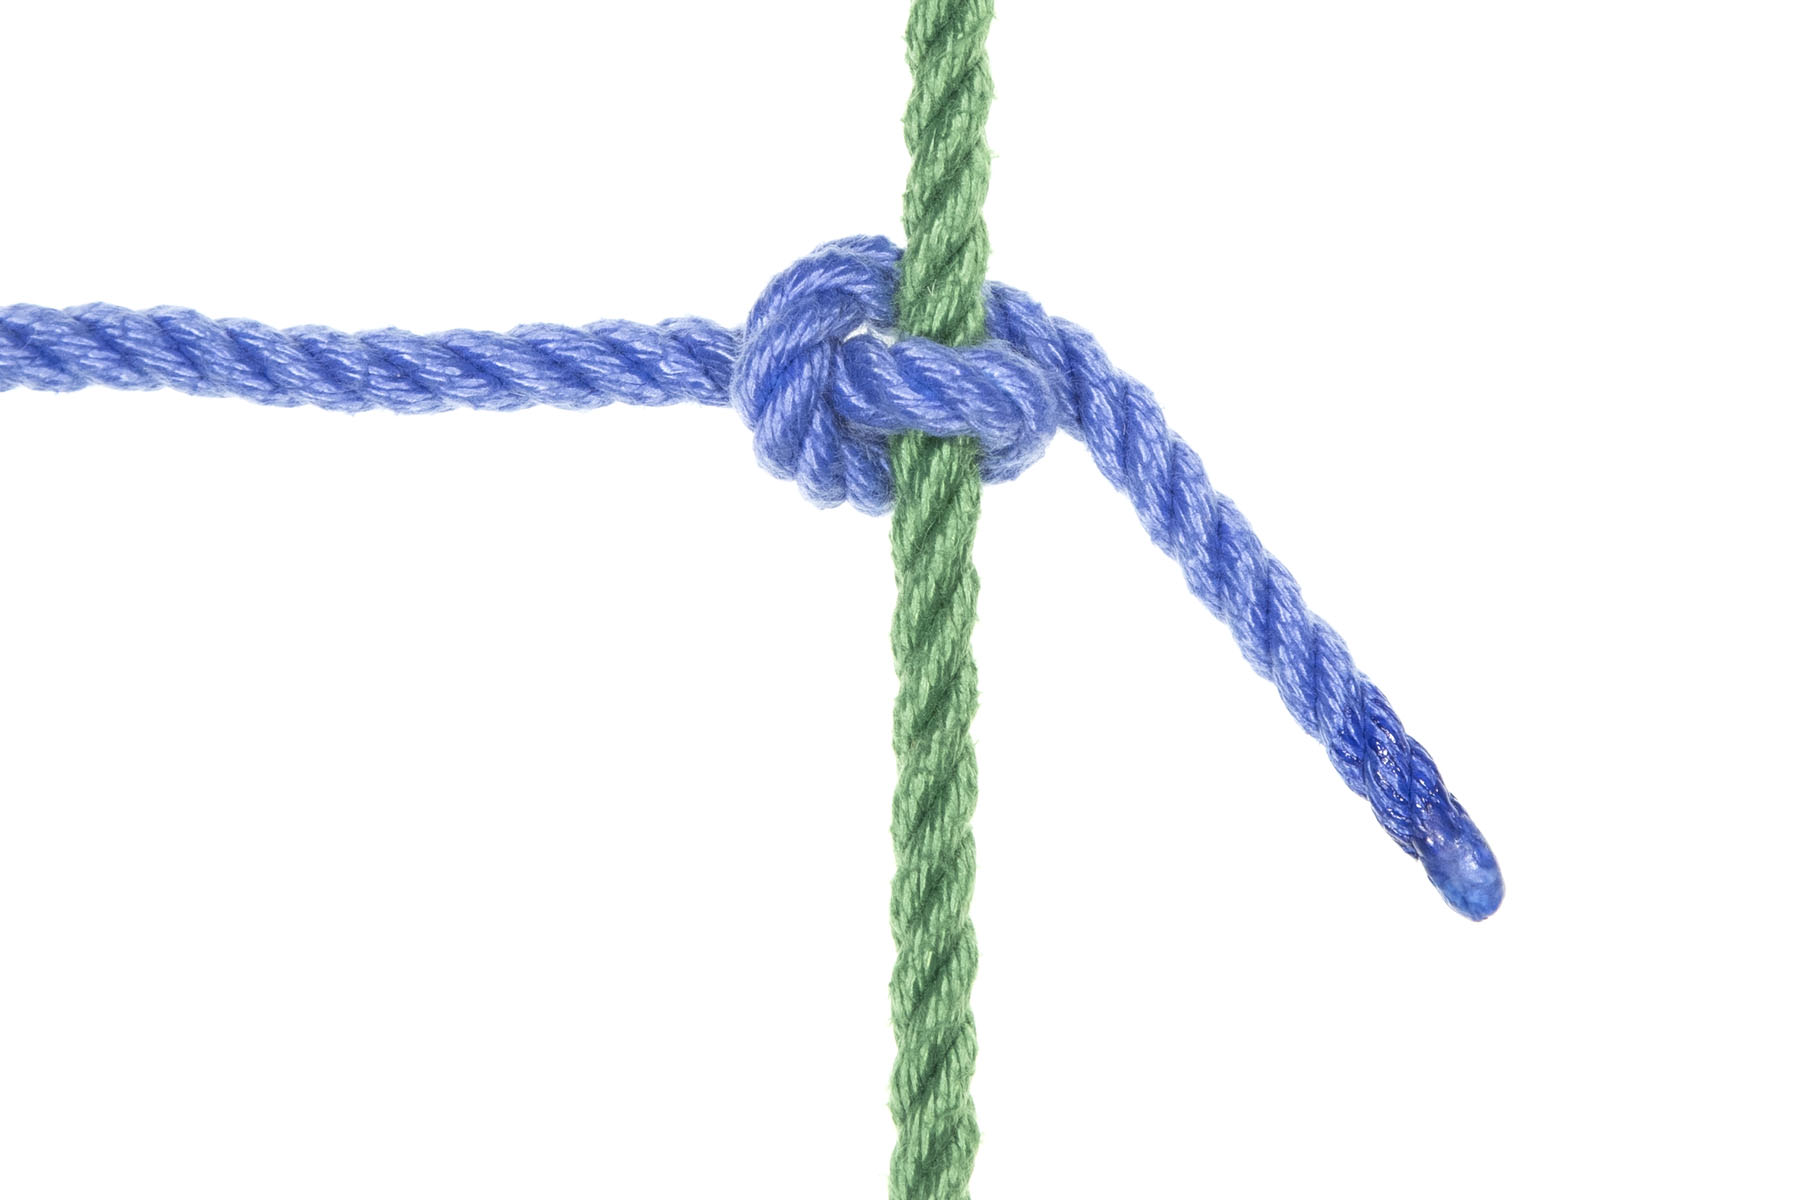 A green rope crosses the frame vertically. A blue rope enters from the left and makes a Munter at the green rope before exiting downward at 45 degrees. This blue rope crosses over the green rope, comes back under the green rope but lower in the frame, then crosses over itself moving upward before going under the green rope again. The 45 degree exit means that the blue rope is pulled into the Munter, tightening it.